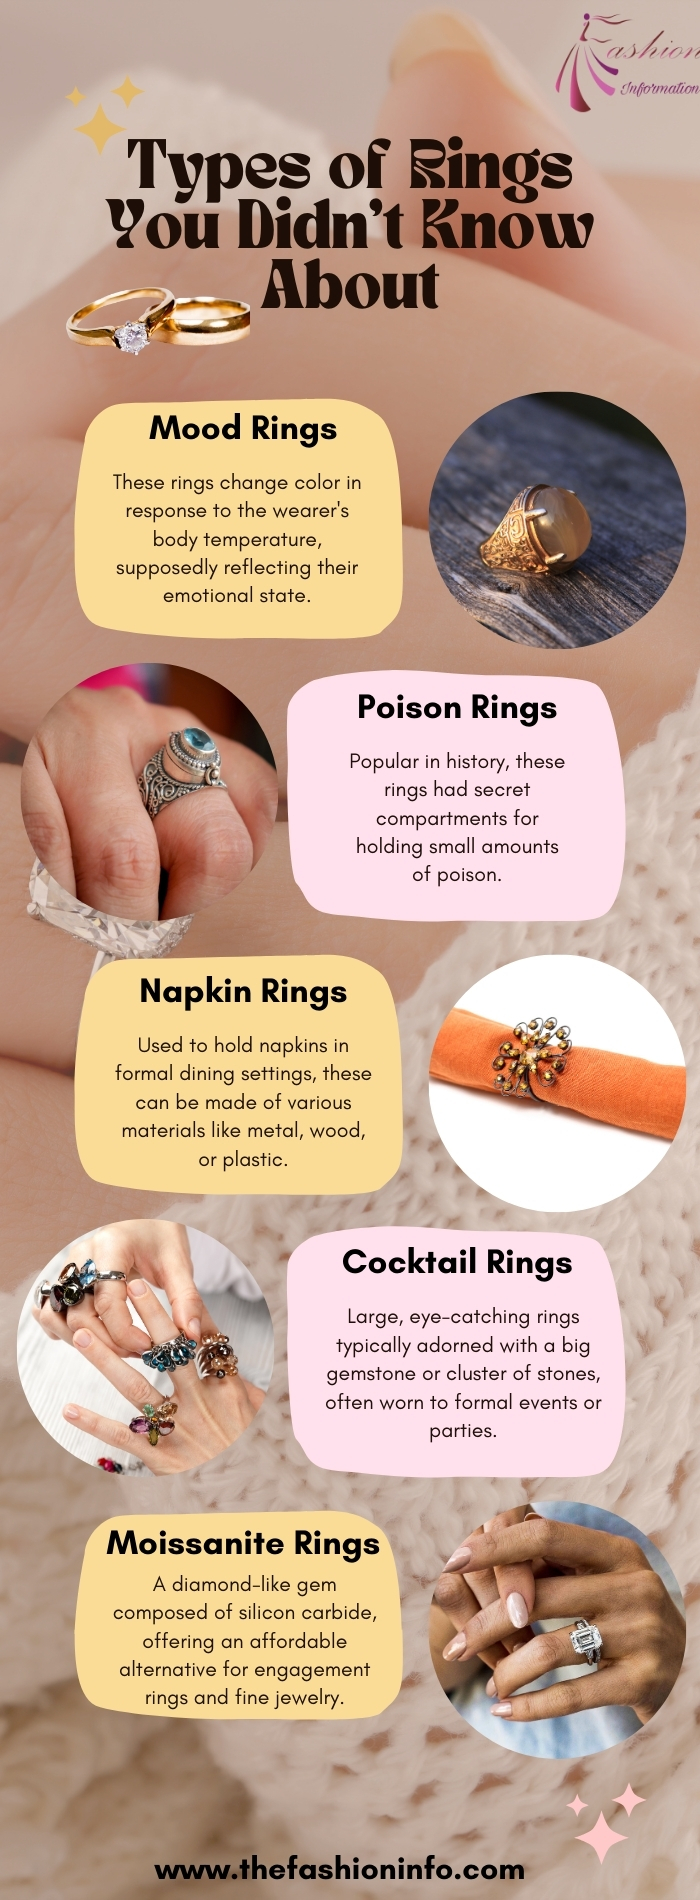 Types of Rings You Didn’t Know About